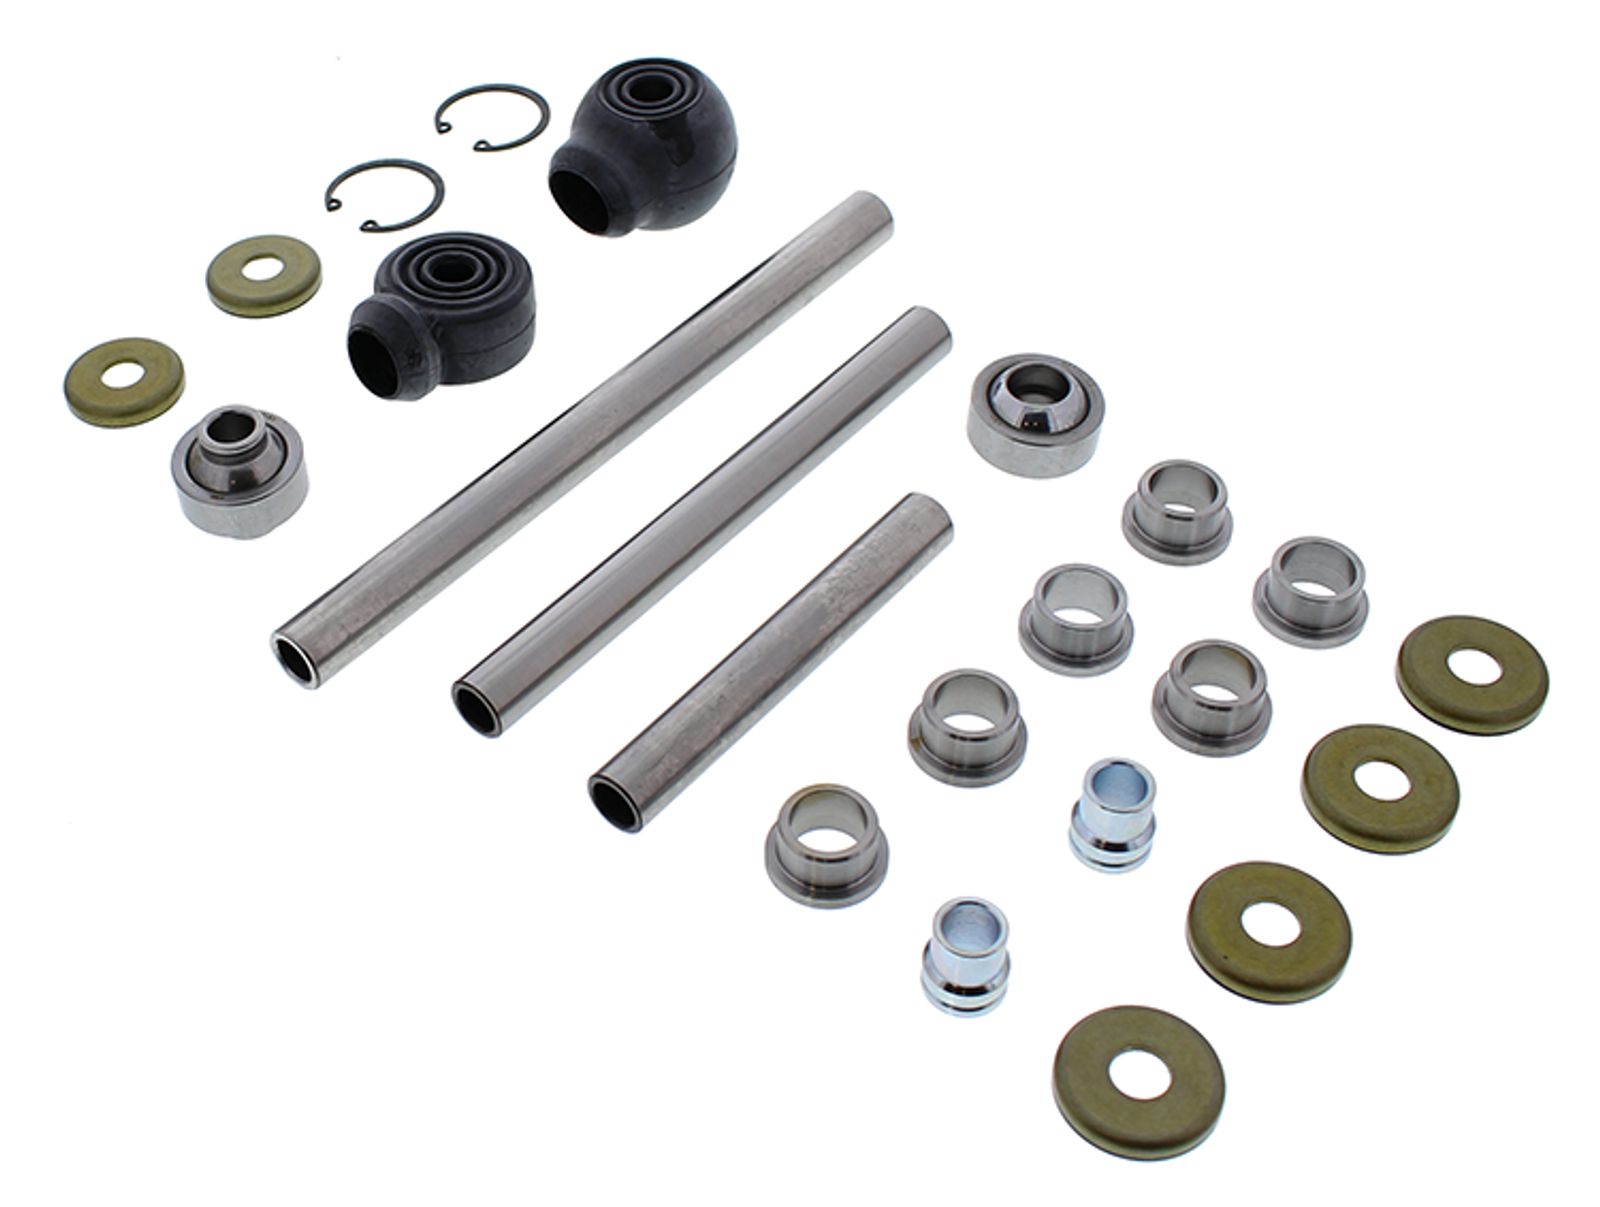 Wrp Rear Ind. Suspension Kits - WRP501170 image